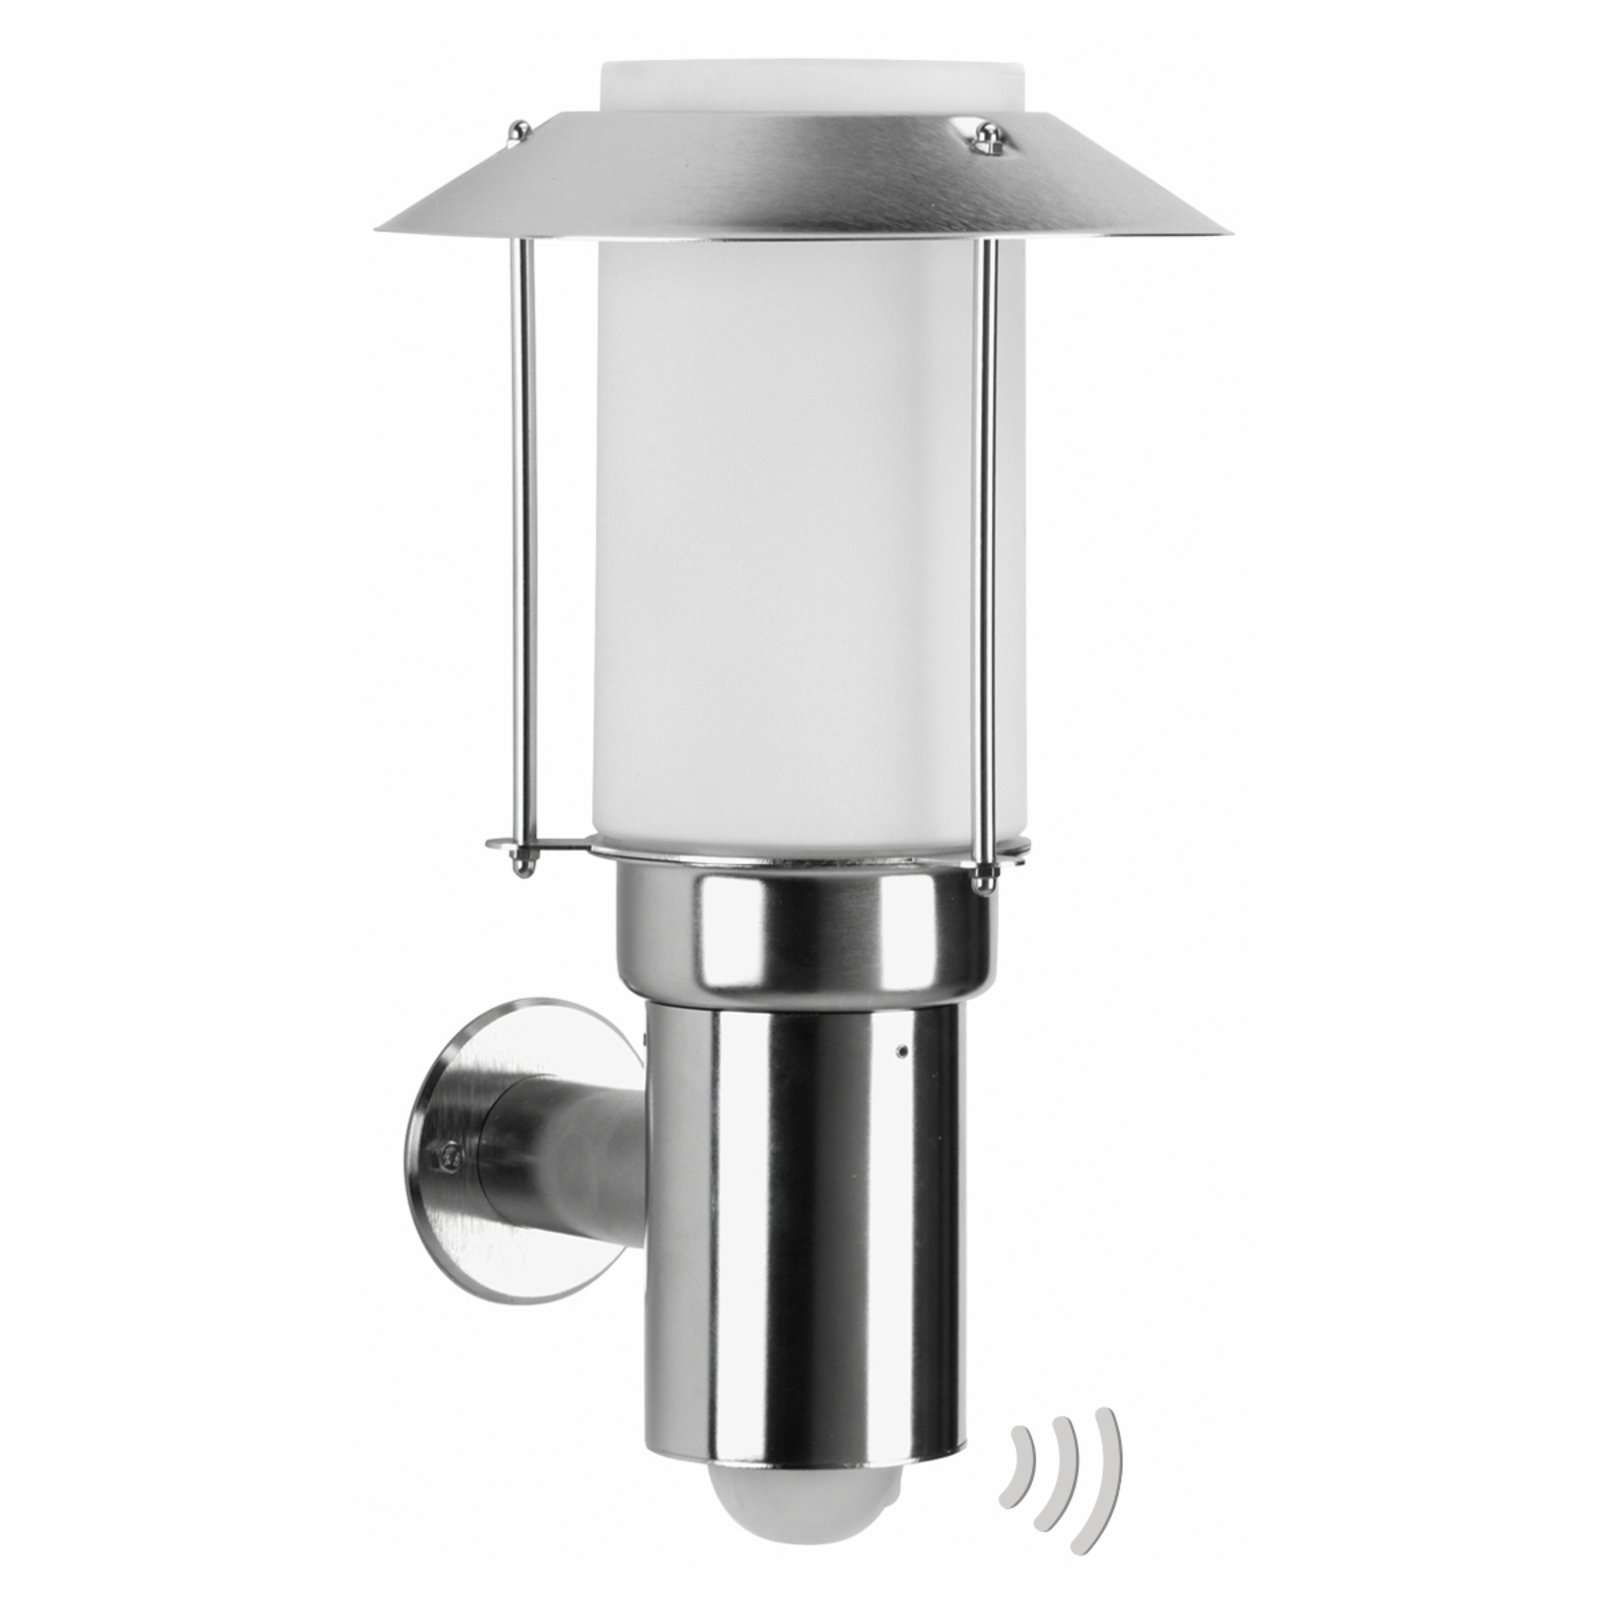 Tea outdoor wall light with a motion detector